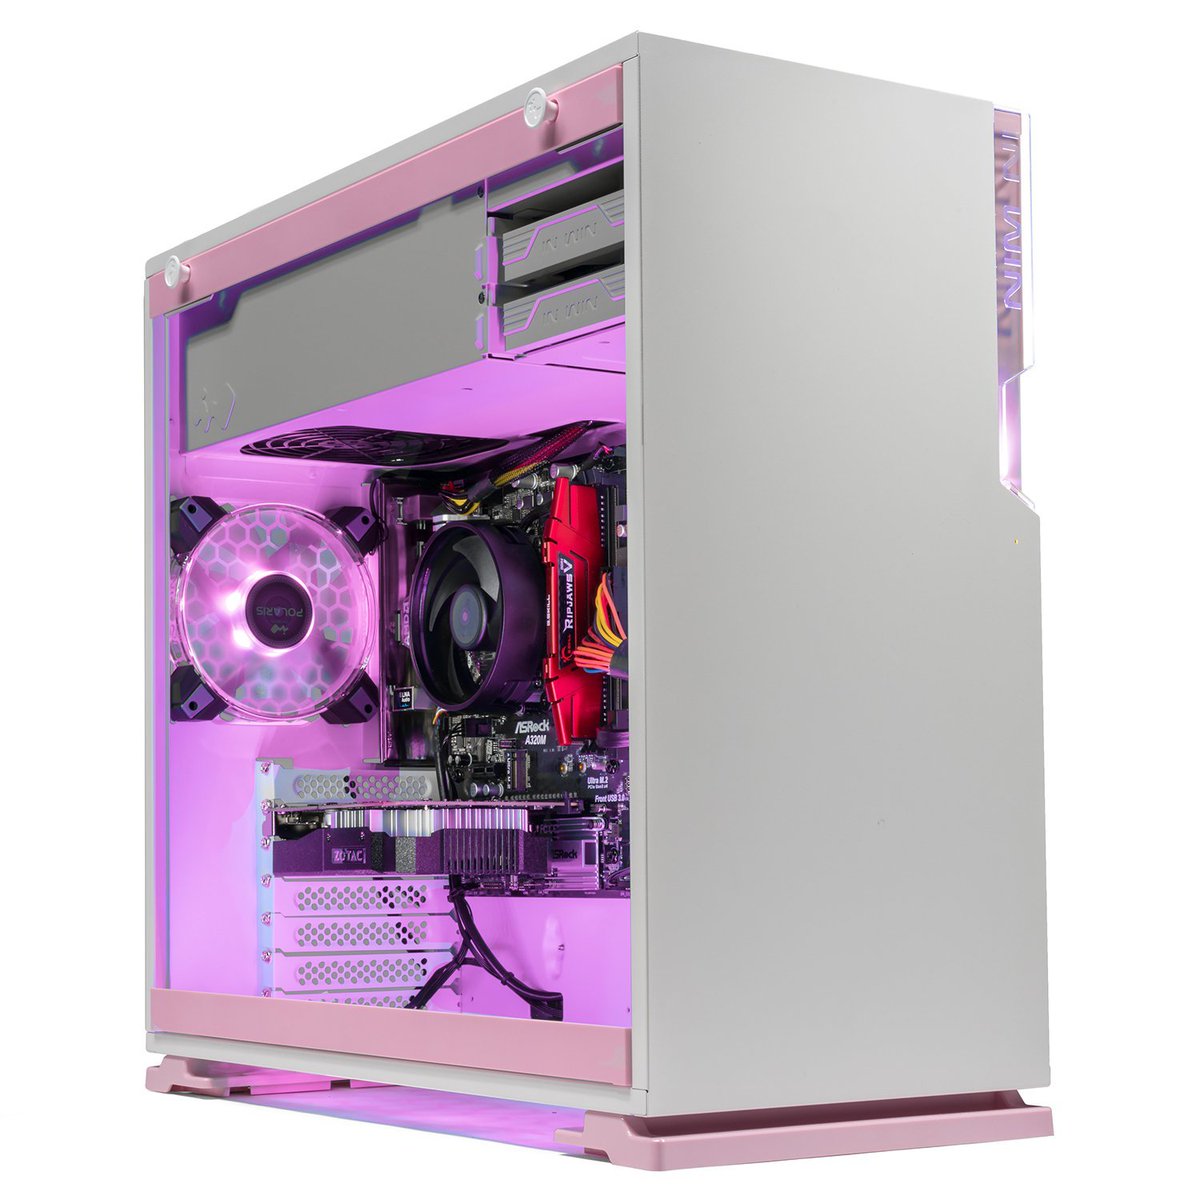 Ever seen a pink 101? @SkytechGamingPC is selling systems featuring this case between $699.99- $999.99 on @Amazon! amazon.com/Limited-SkyTec…